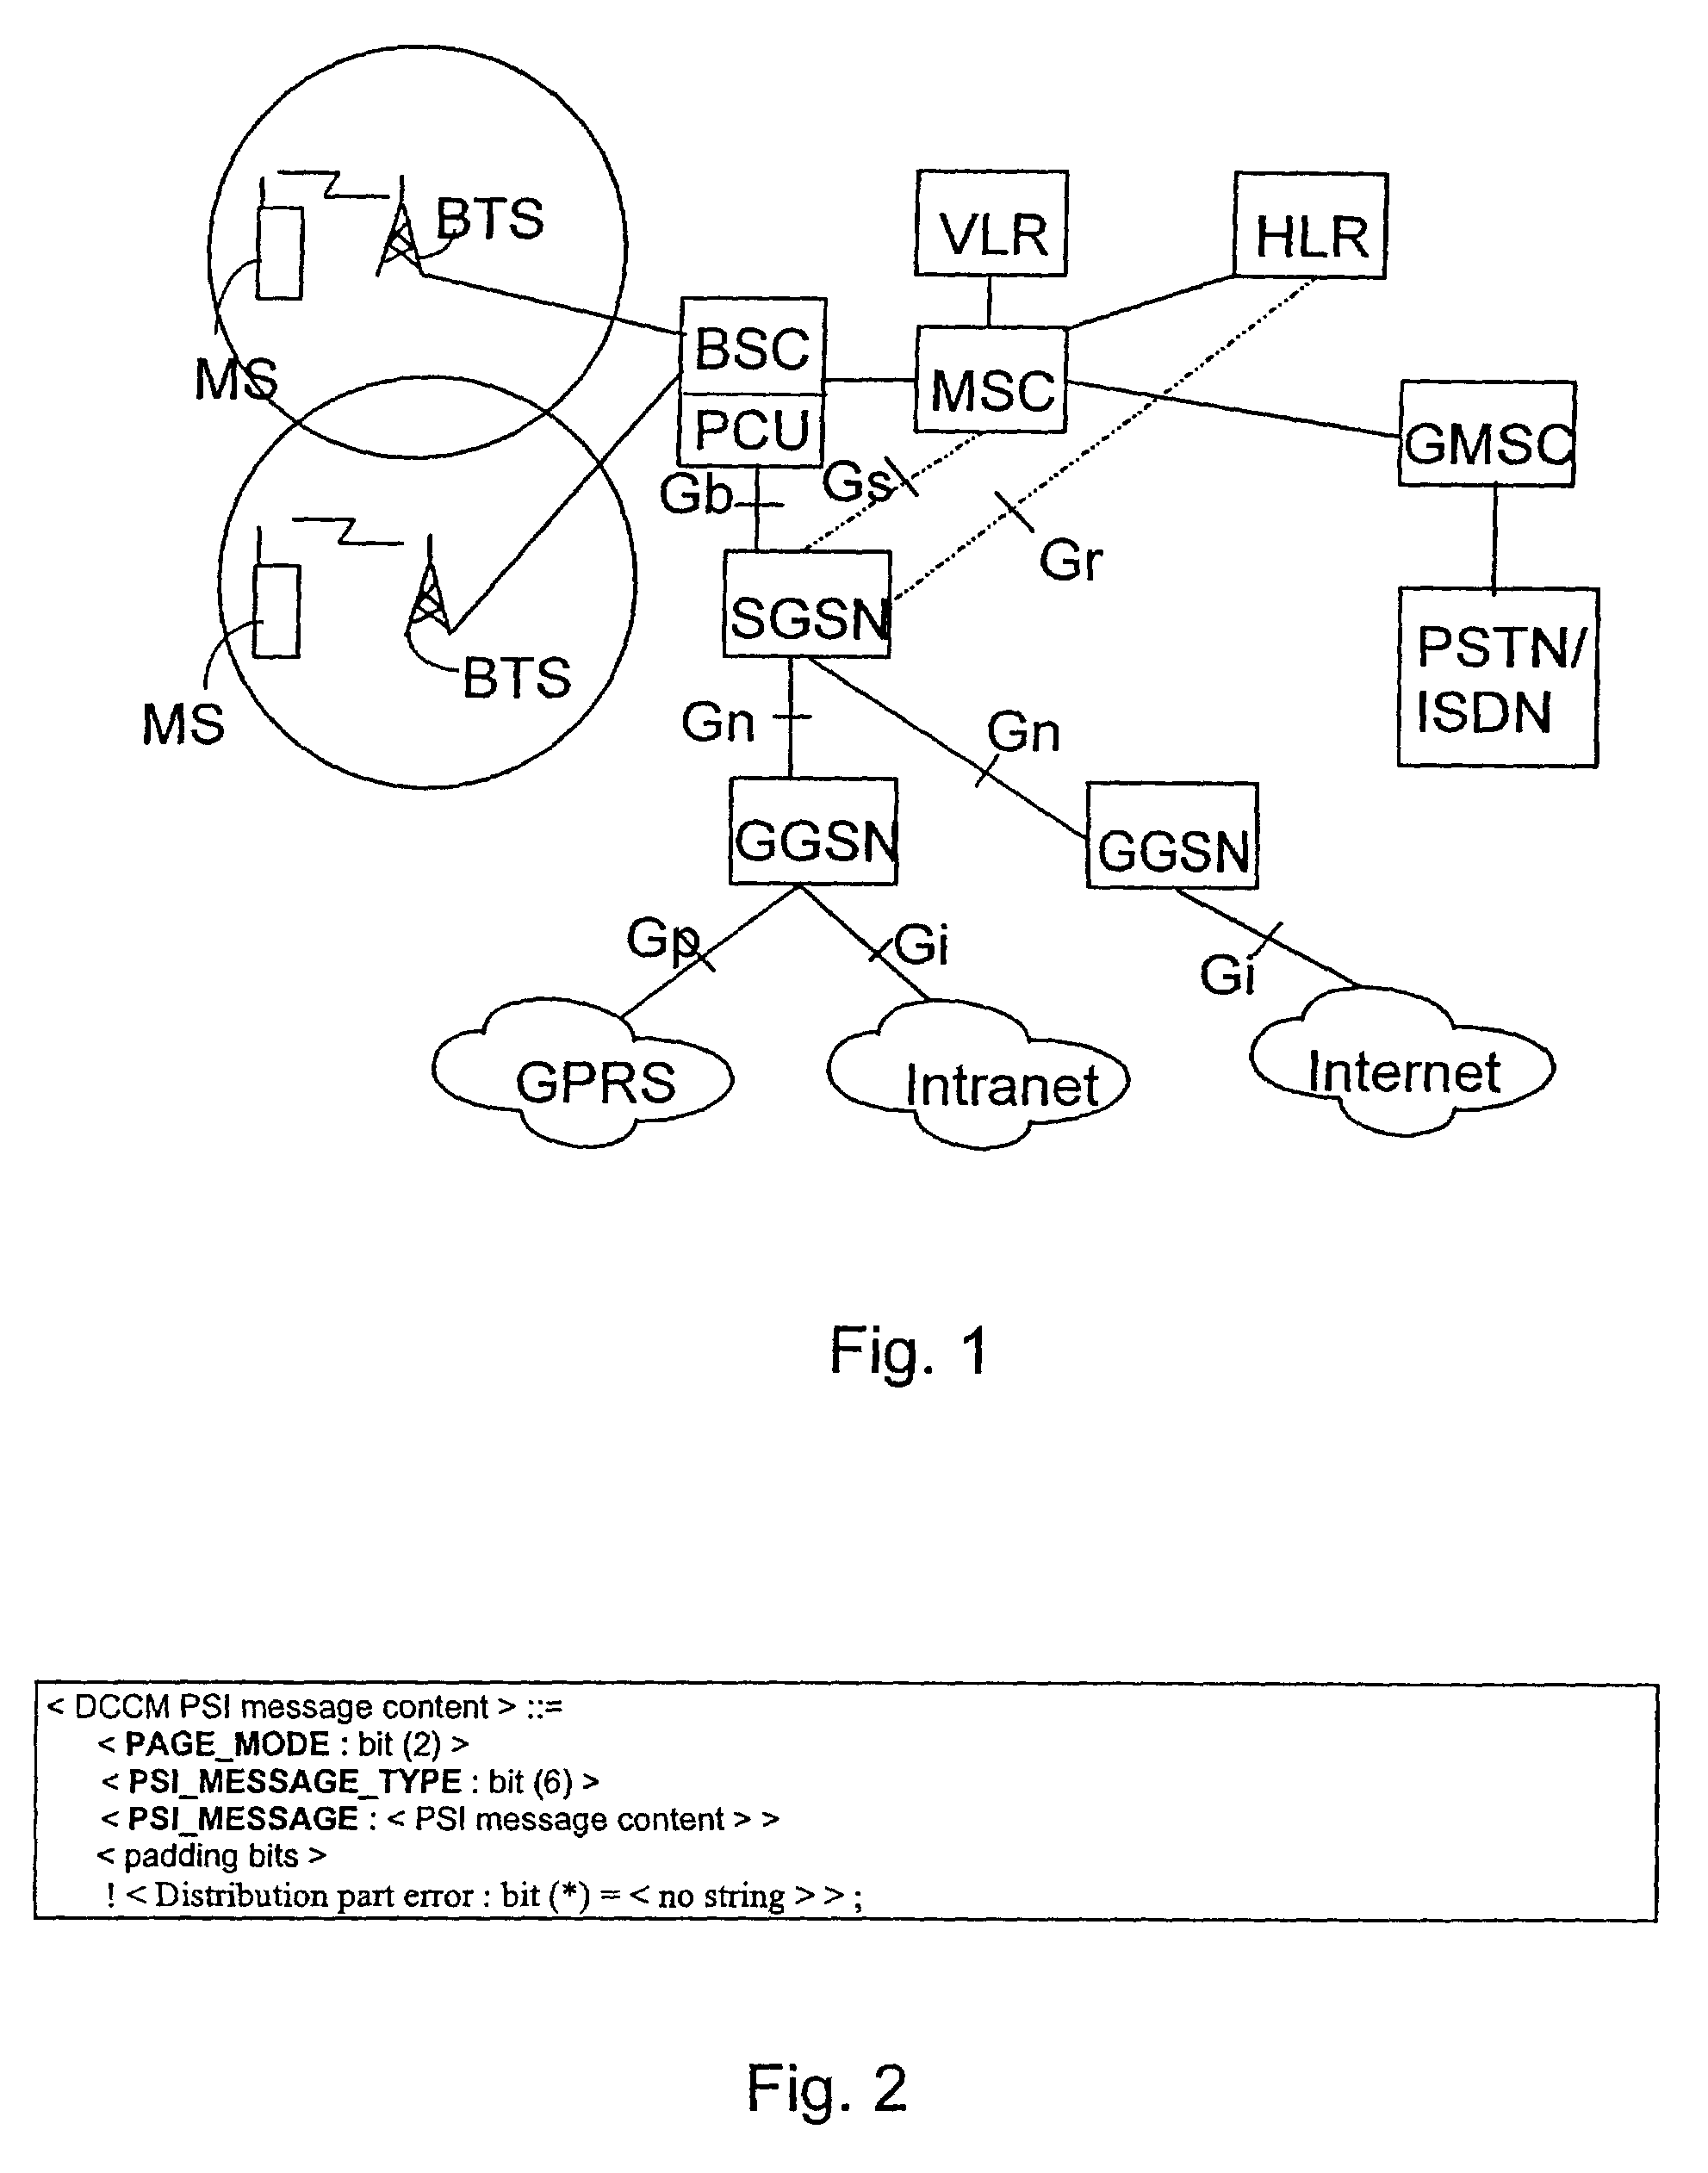 Transmitting control messages on control channels of packet data network